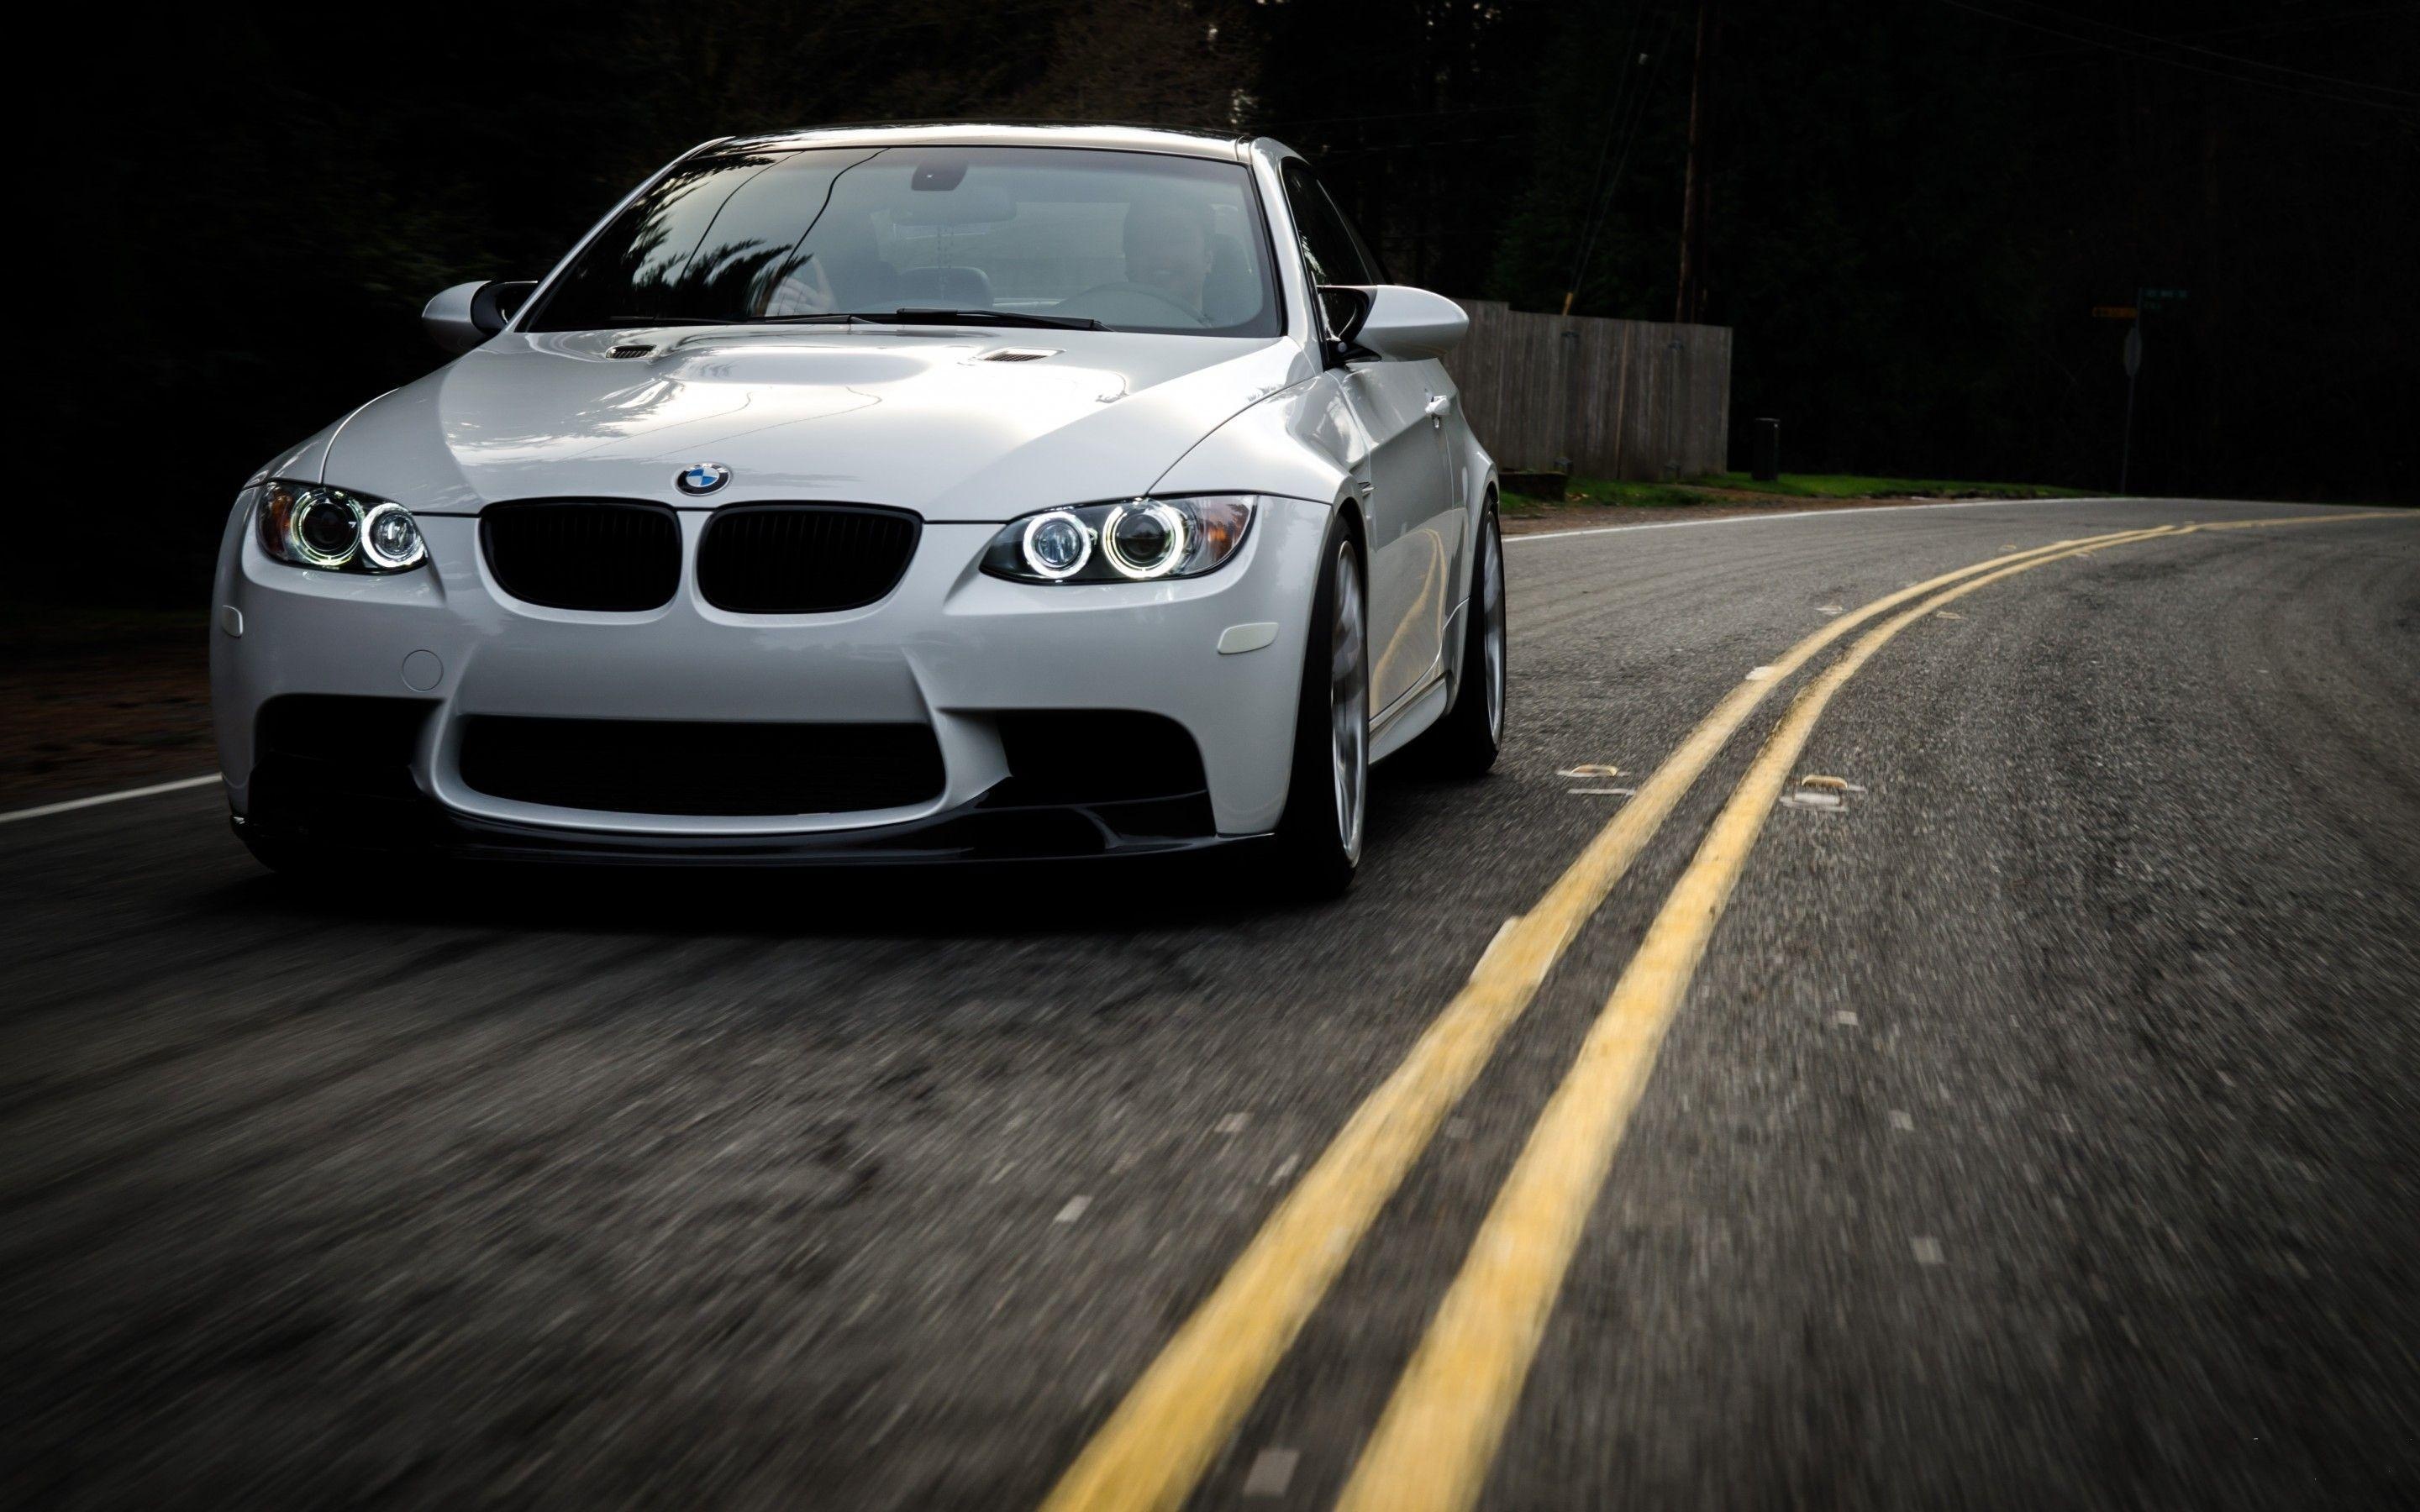 BMW M3, E92 generation, High-performance coupe, Exhilarating experience, 2880x1800 HD Desktop